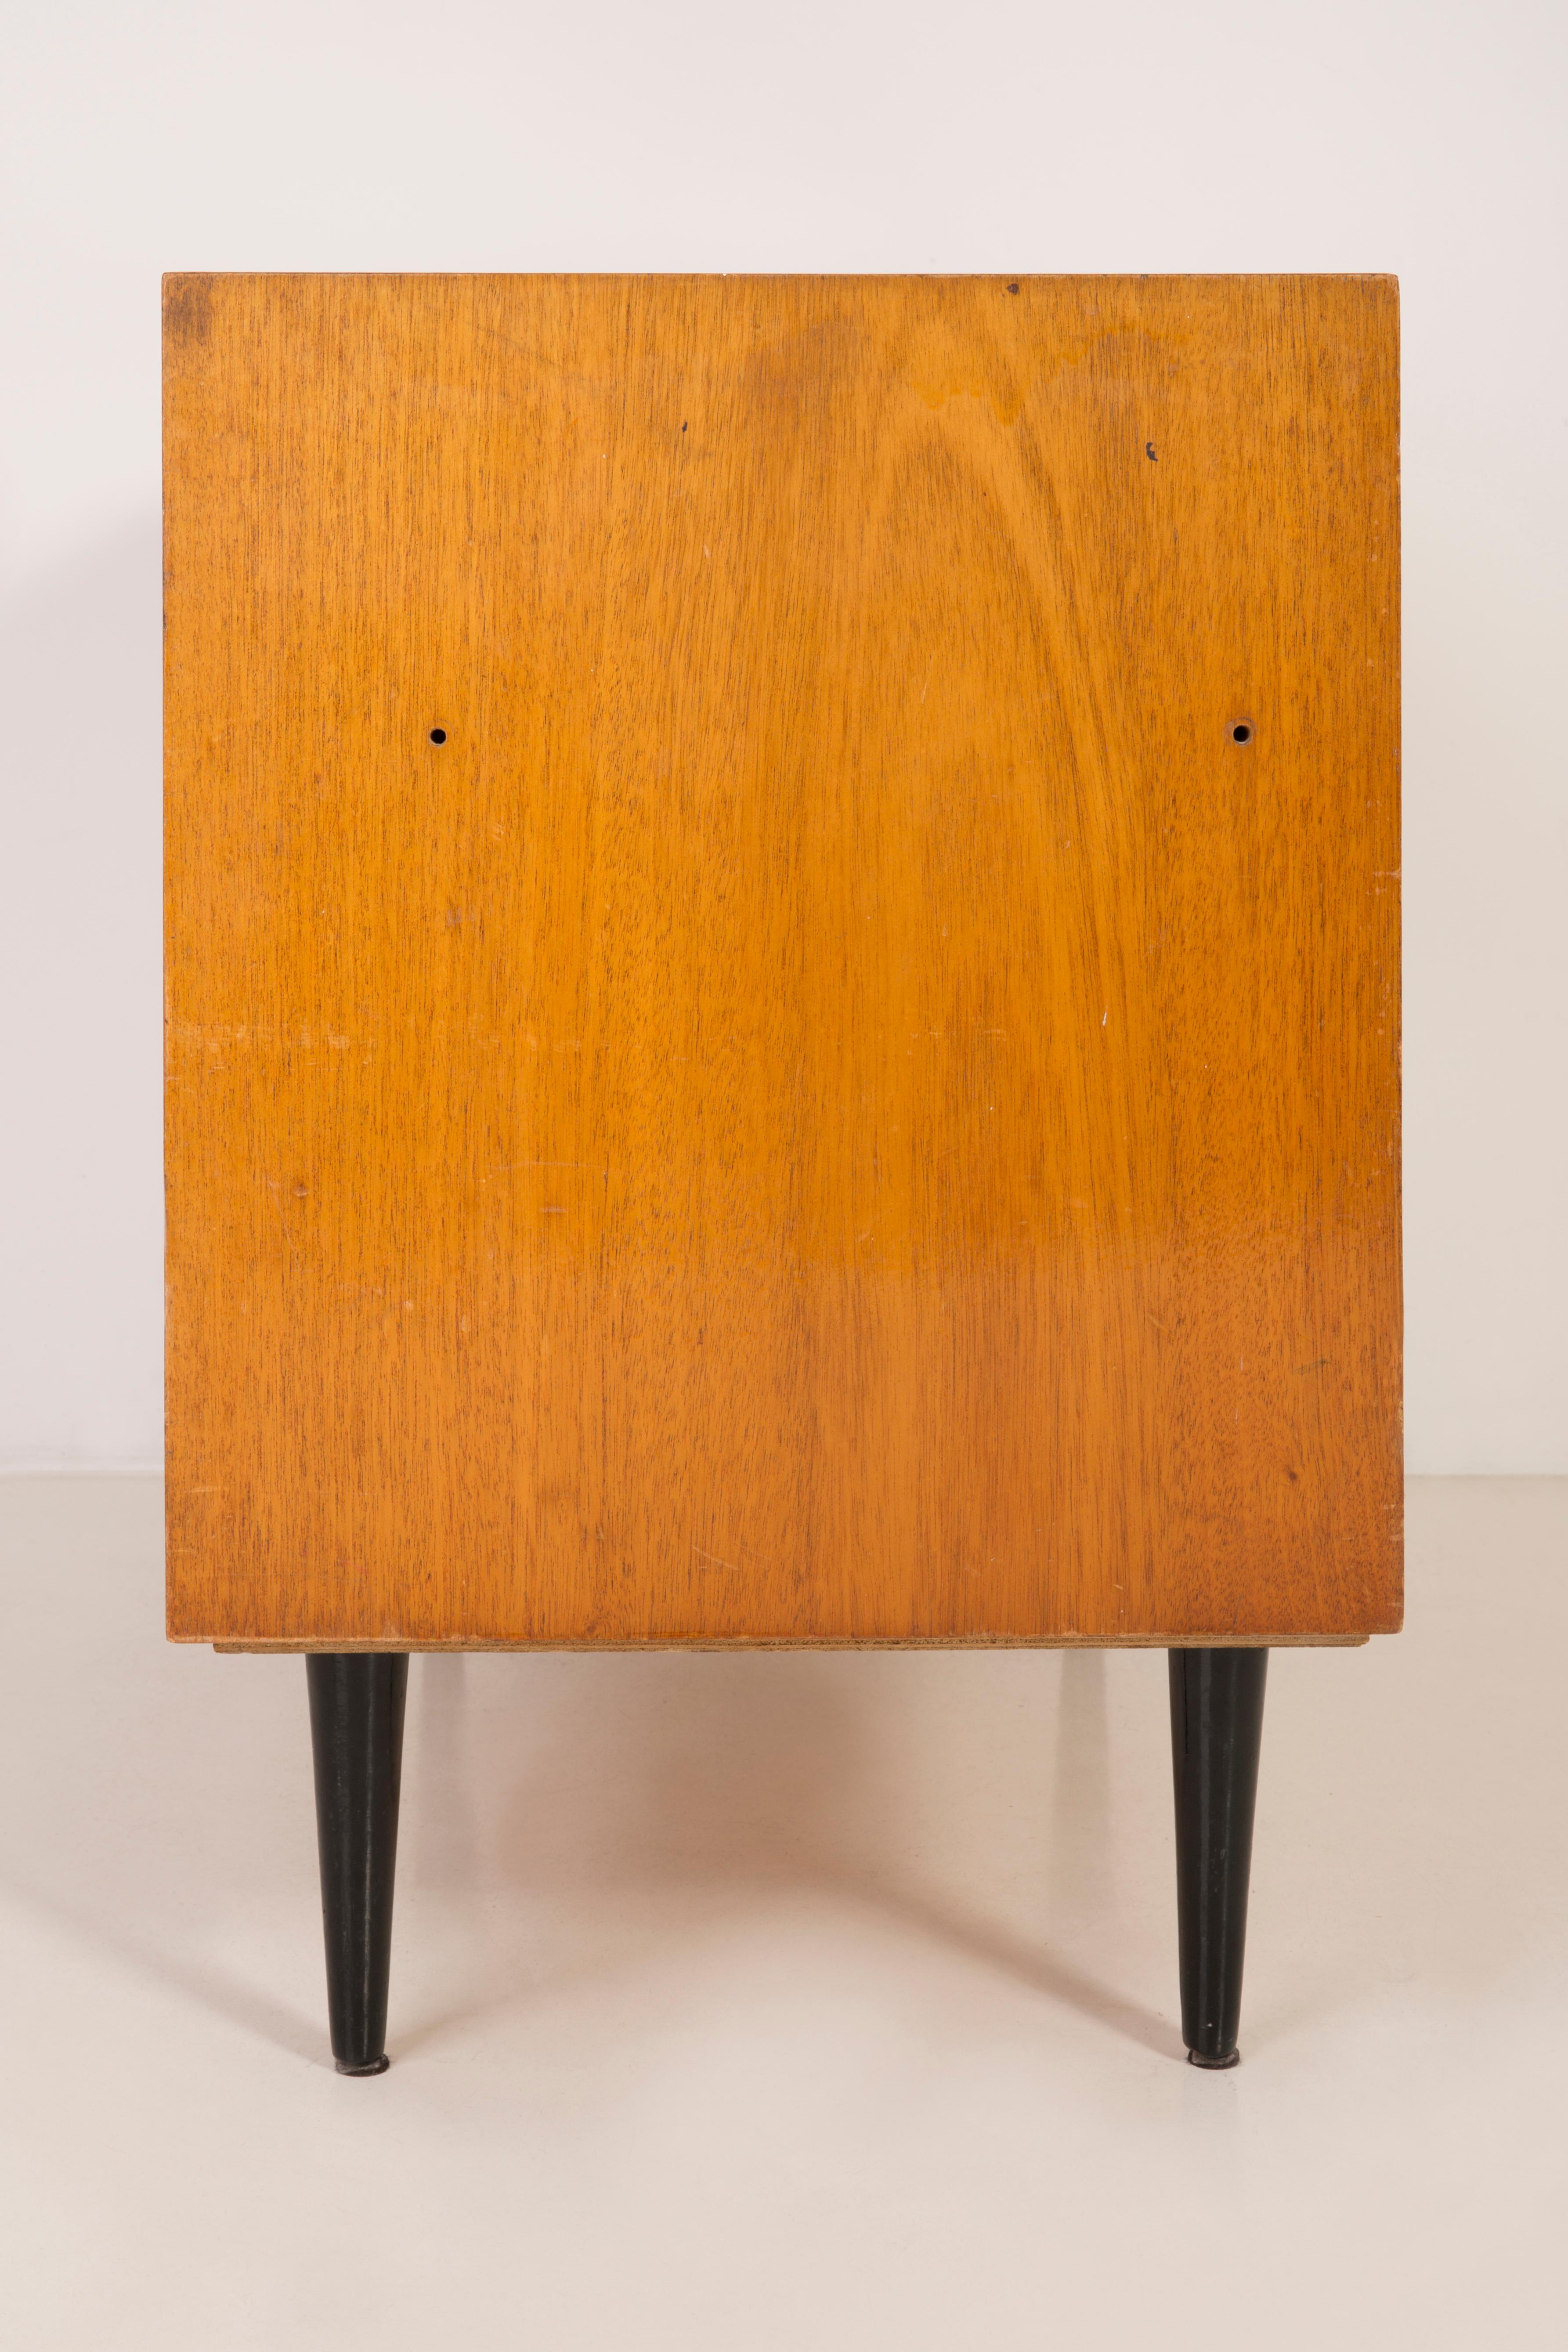 Hand-Painted Mid-Century Modern Vintage TV Table or Sideboard, Wood, Poland, 1960 For Sale